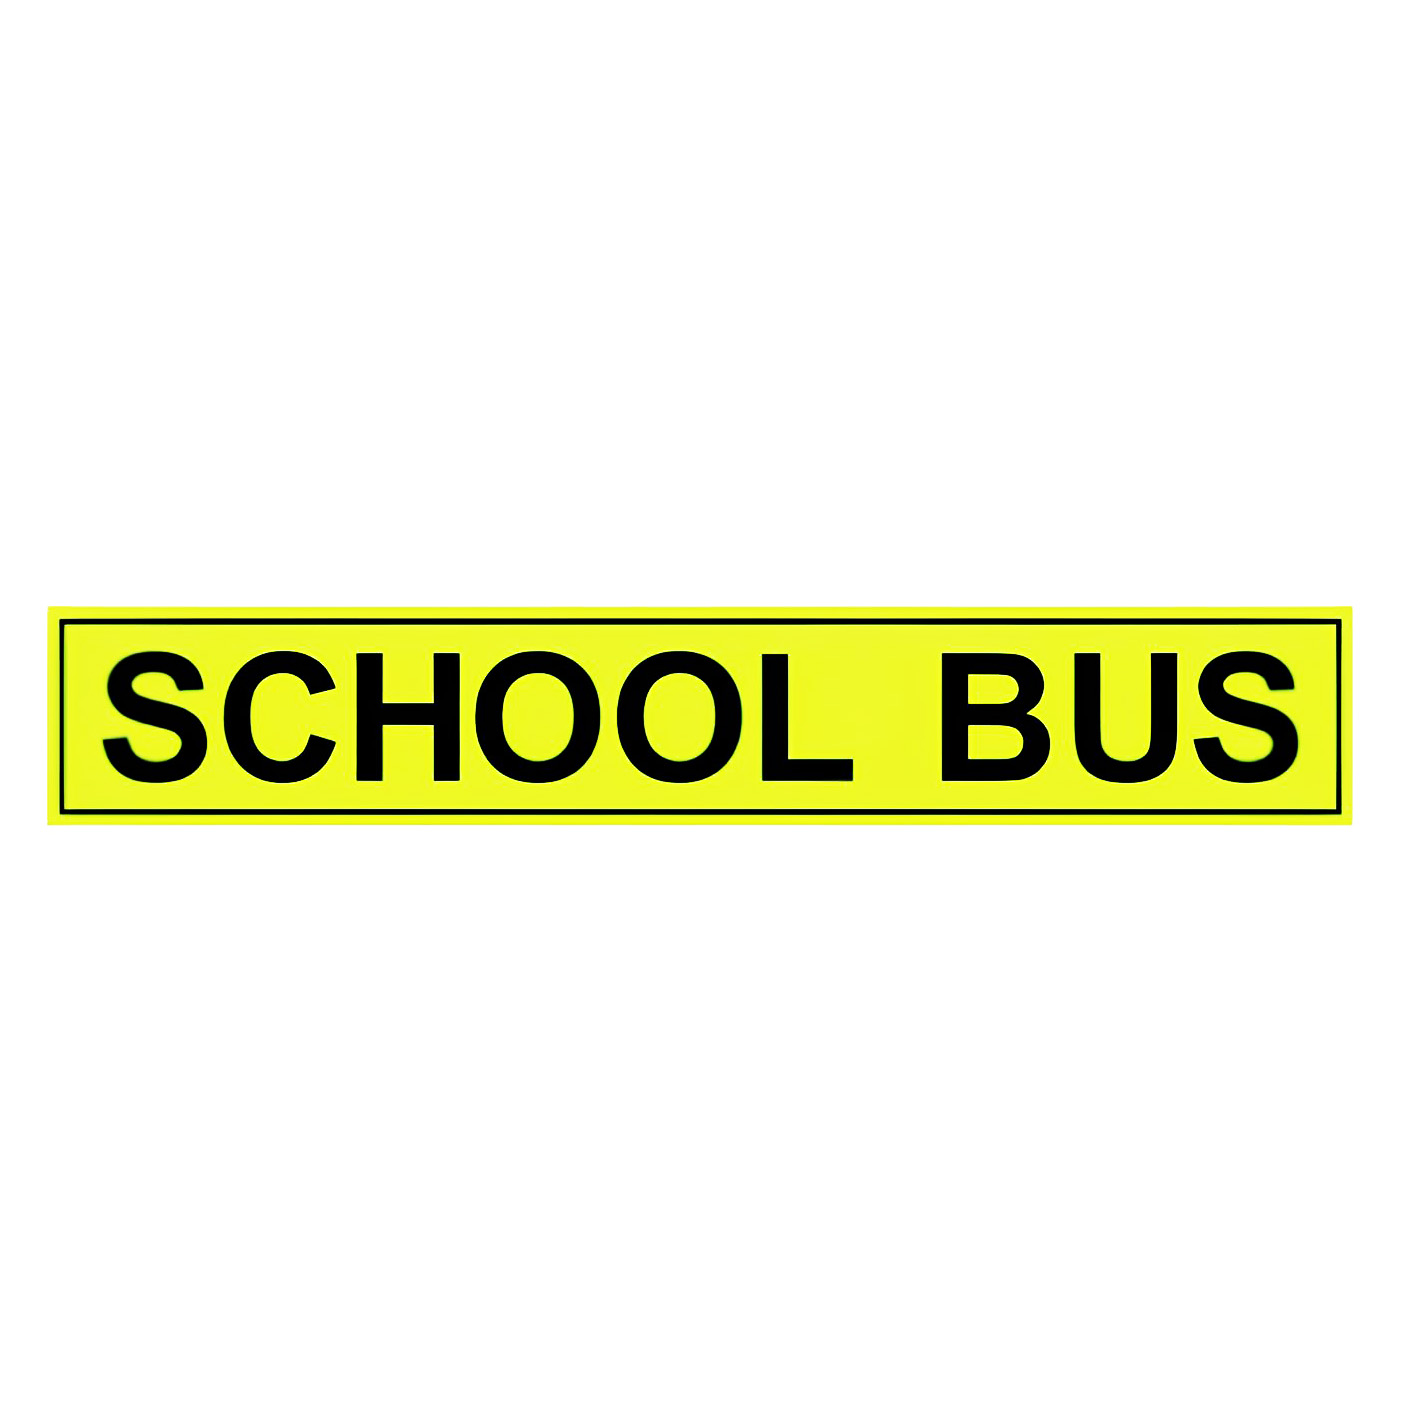 School Bus Sign – large, standard height lettering, 1200mm x 200mm. Useful for small to medium sized school buses such as Toyota HiAce Commuter, Mitsubishi Rosa, Toyota Coaster. It is also used for some dual front windscreen buses such as Yutong and King Long.